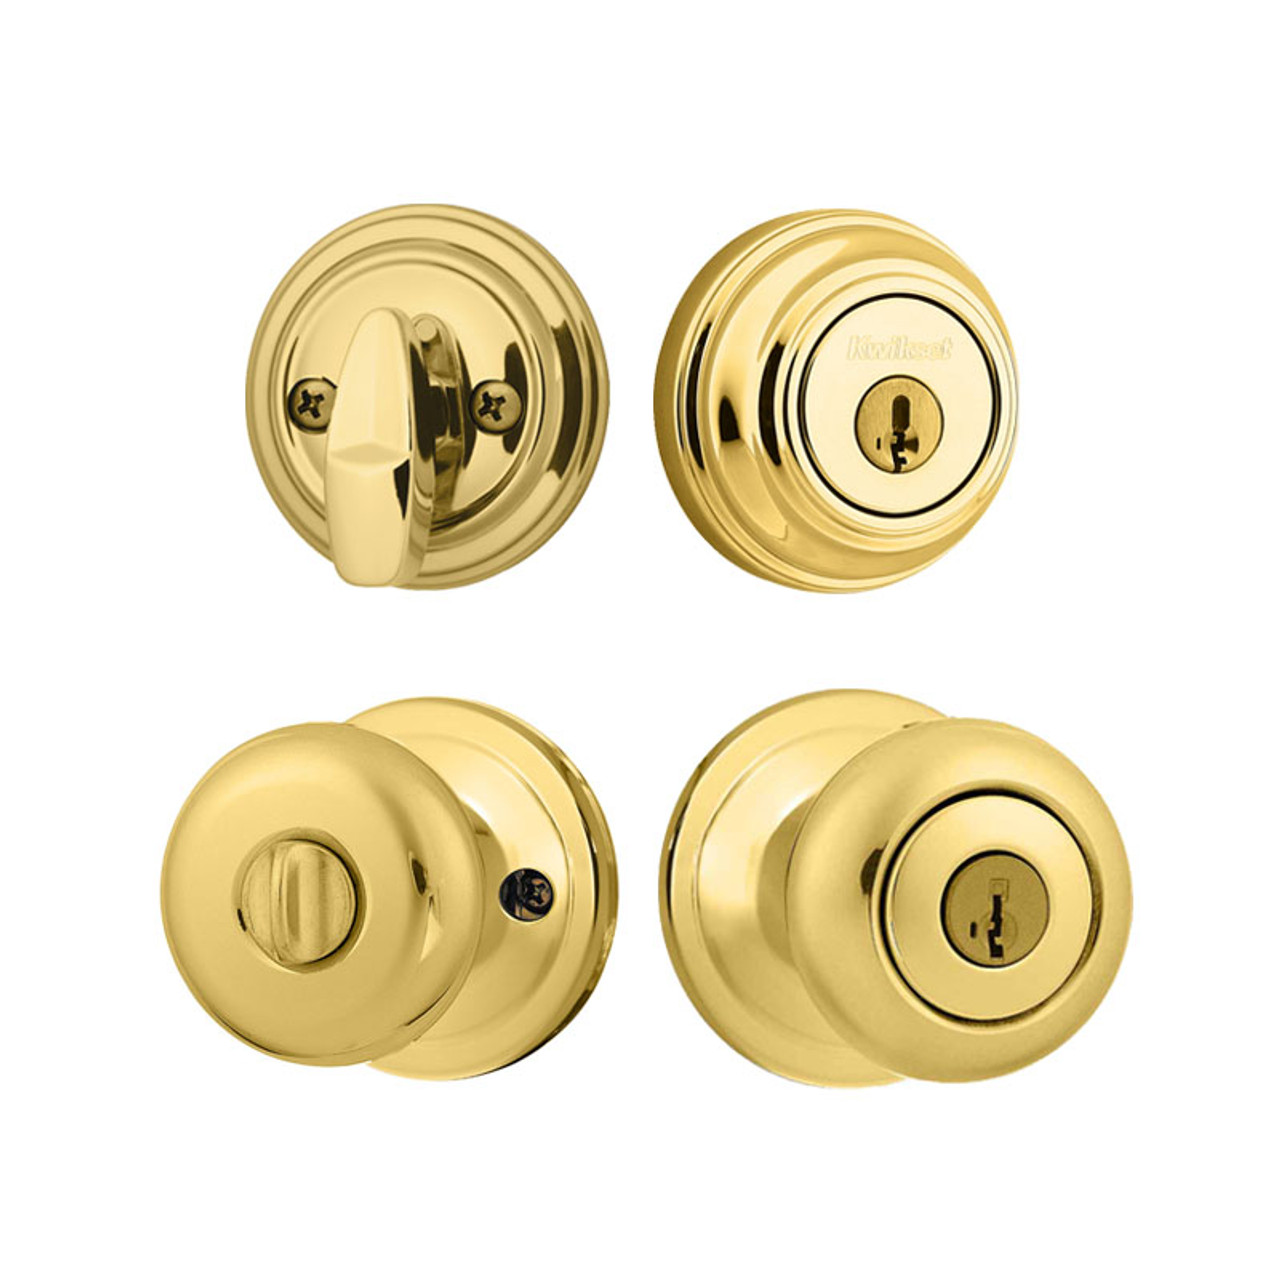 Kwikset 991 Juno Entry Knob and Single Cylinder Deadbolt Combo Pack - 5